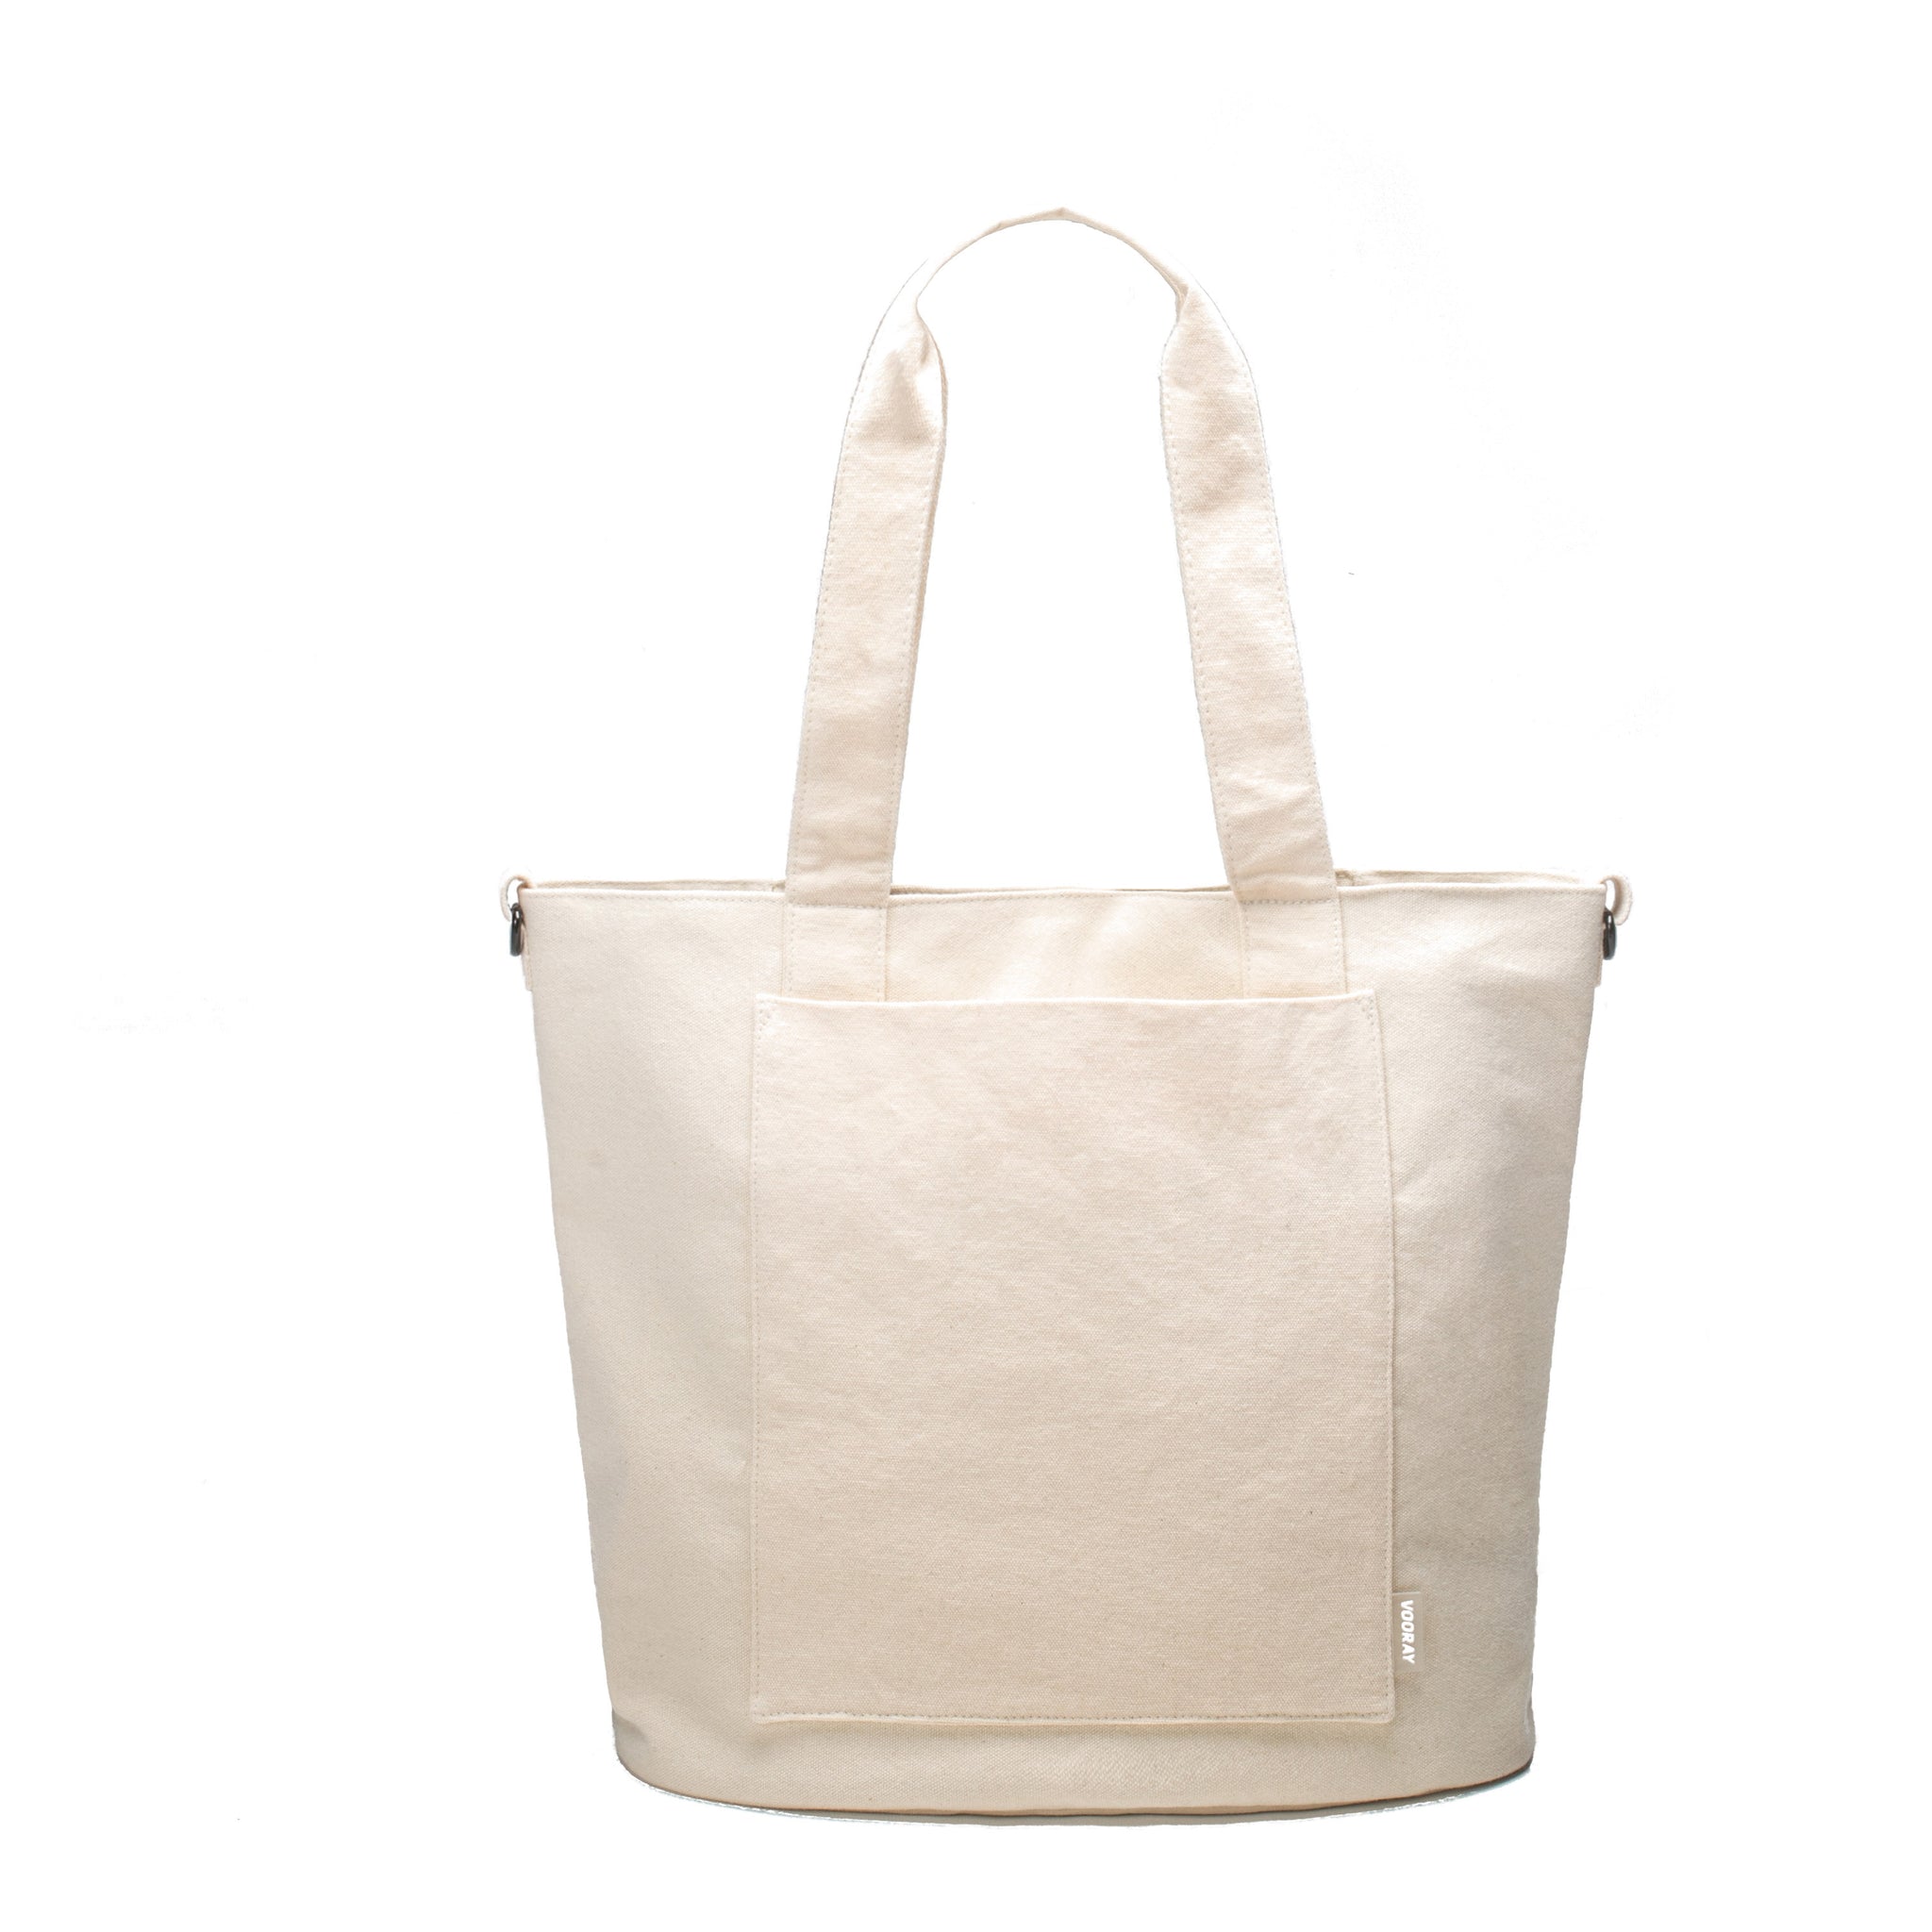 Vooray Zoey Tote - 52 cm - 22L - Organic Cotton Sportsbag or travelbag